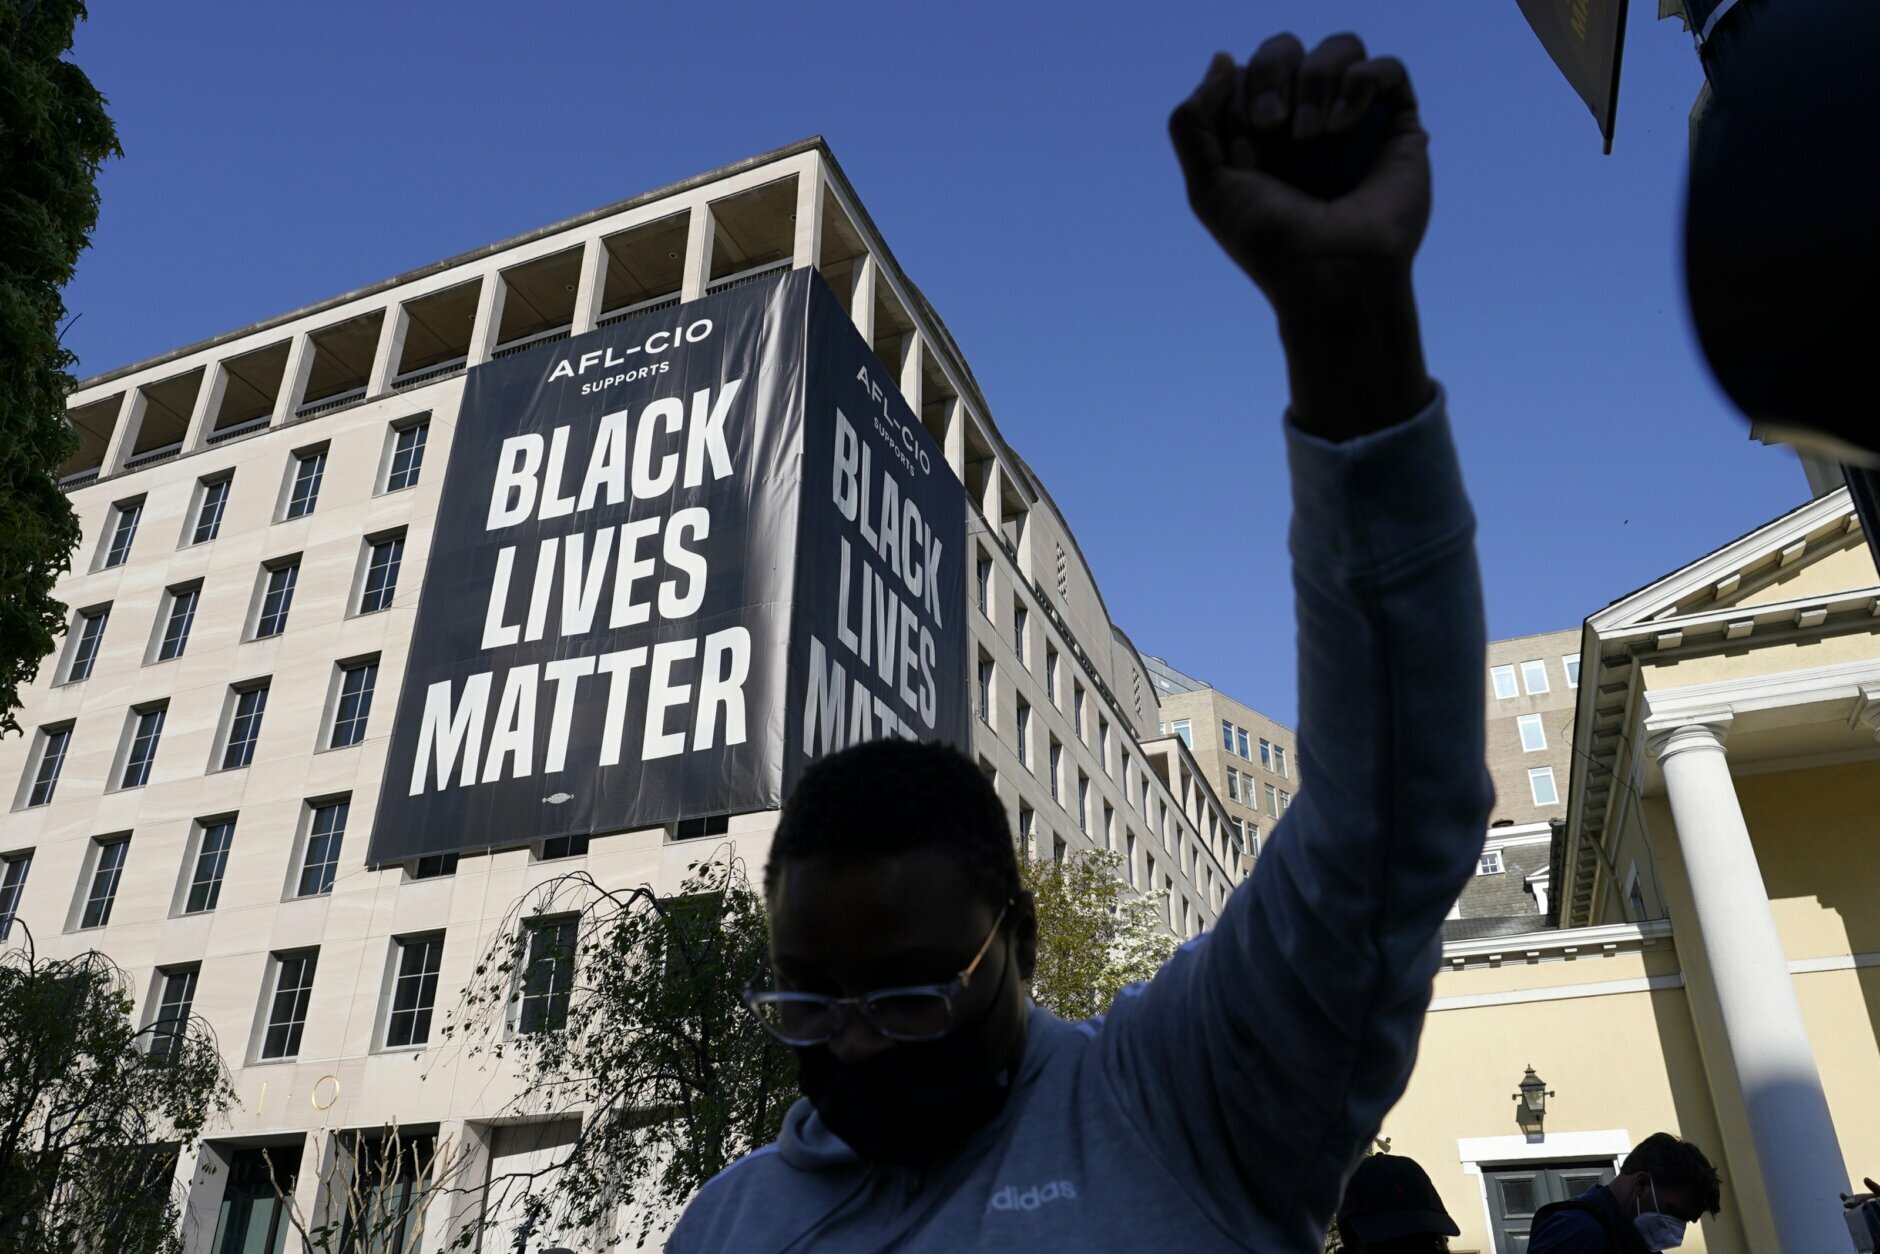 A person reacts on Tuesday, April 20, 2021, in Washington, at Black Lives Matter Plaza near the White House after the verdict in Minneapolis, in the murder trial against former Minneapolis police officer Derek Chauvin was announced. (AP Photo/Alex Brandon)